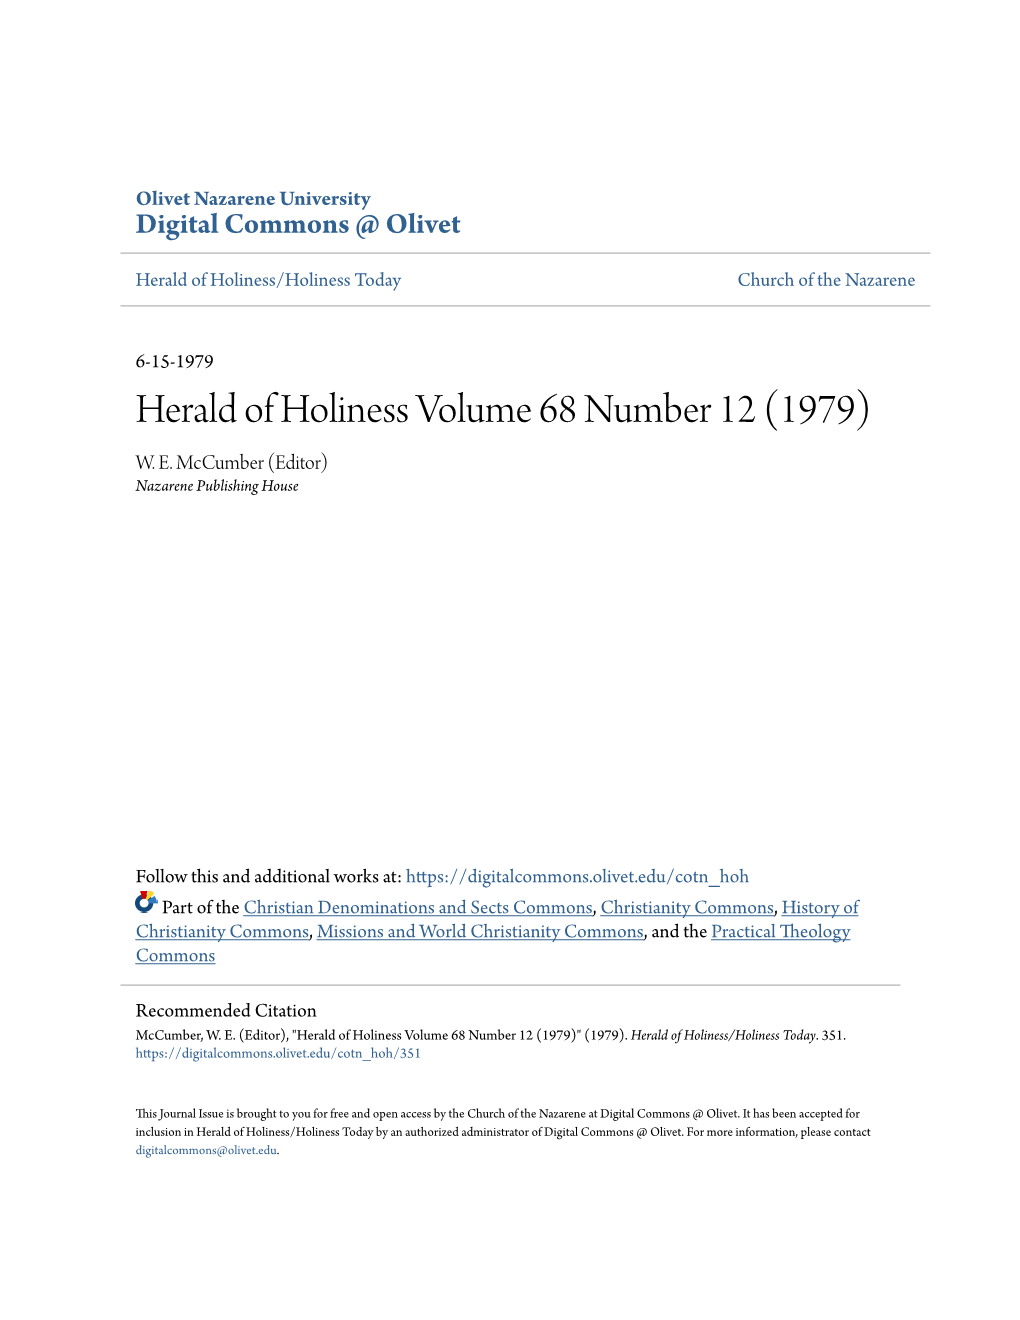 Herald of Holiness Volume 68 Number 12 (1979) W